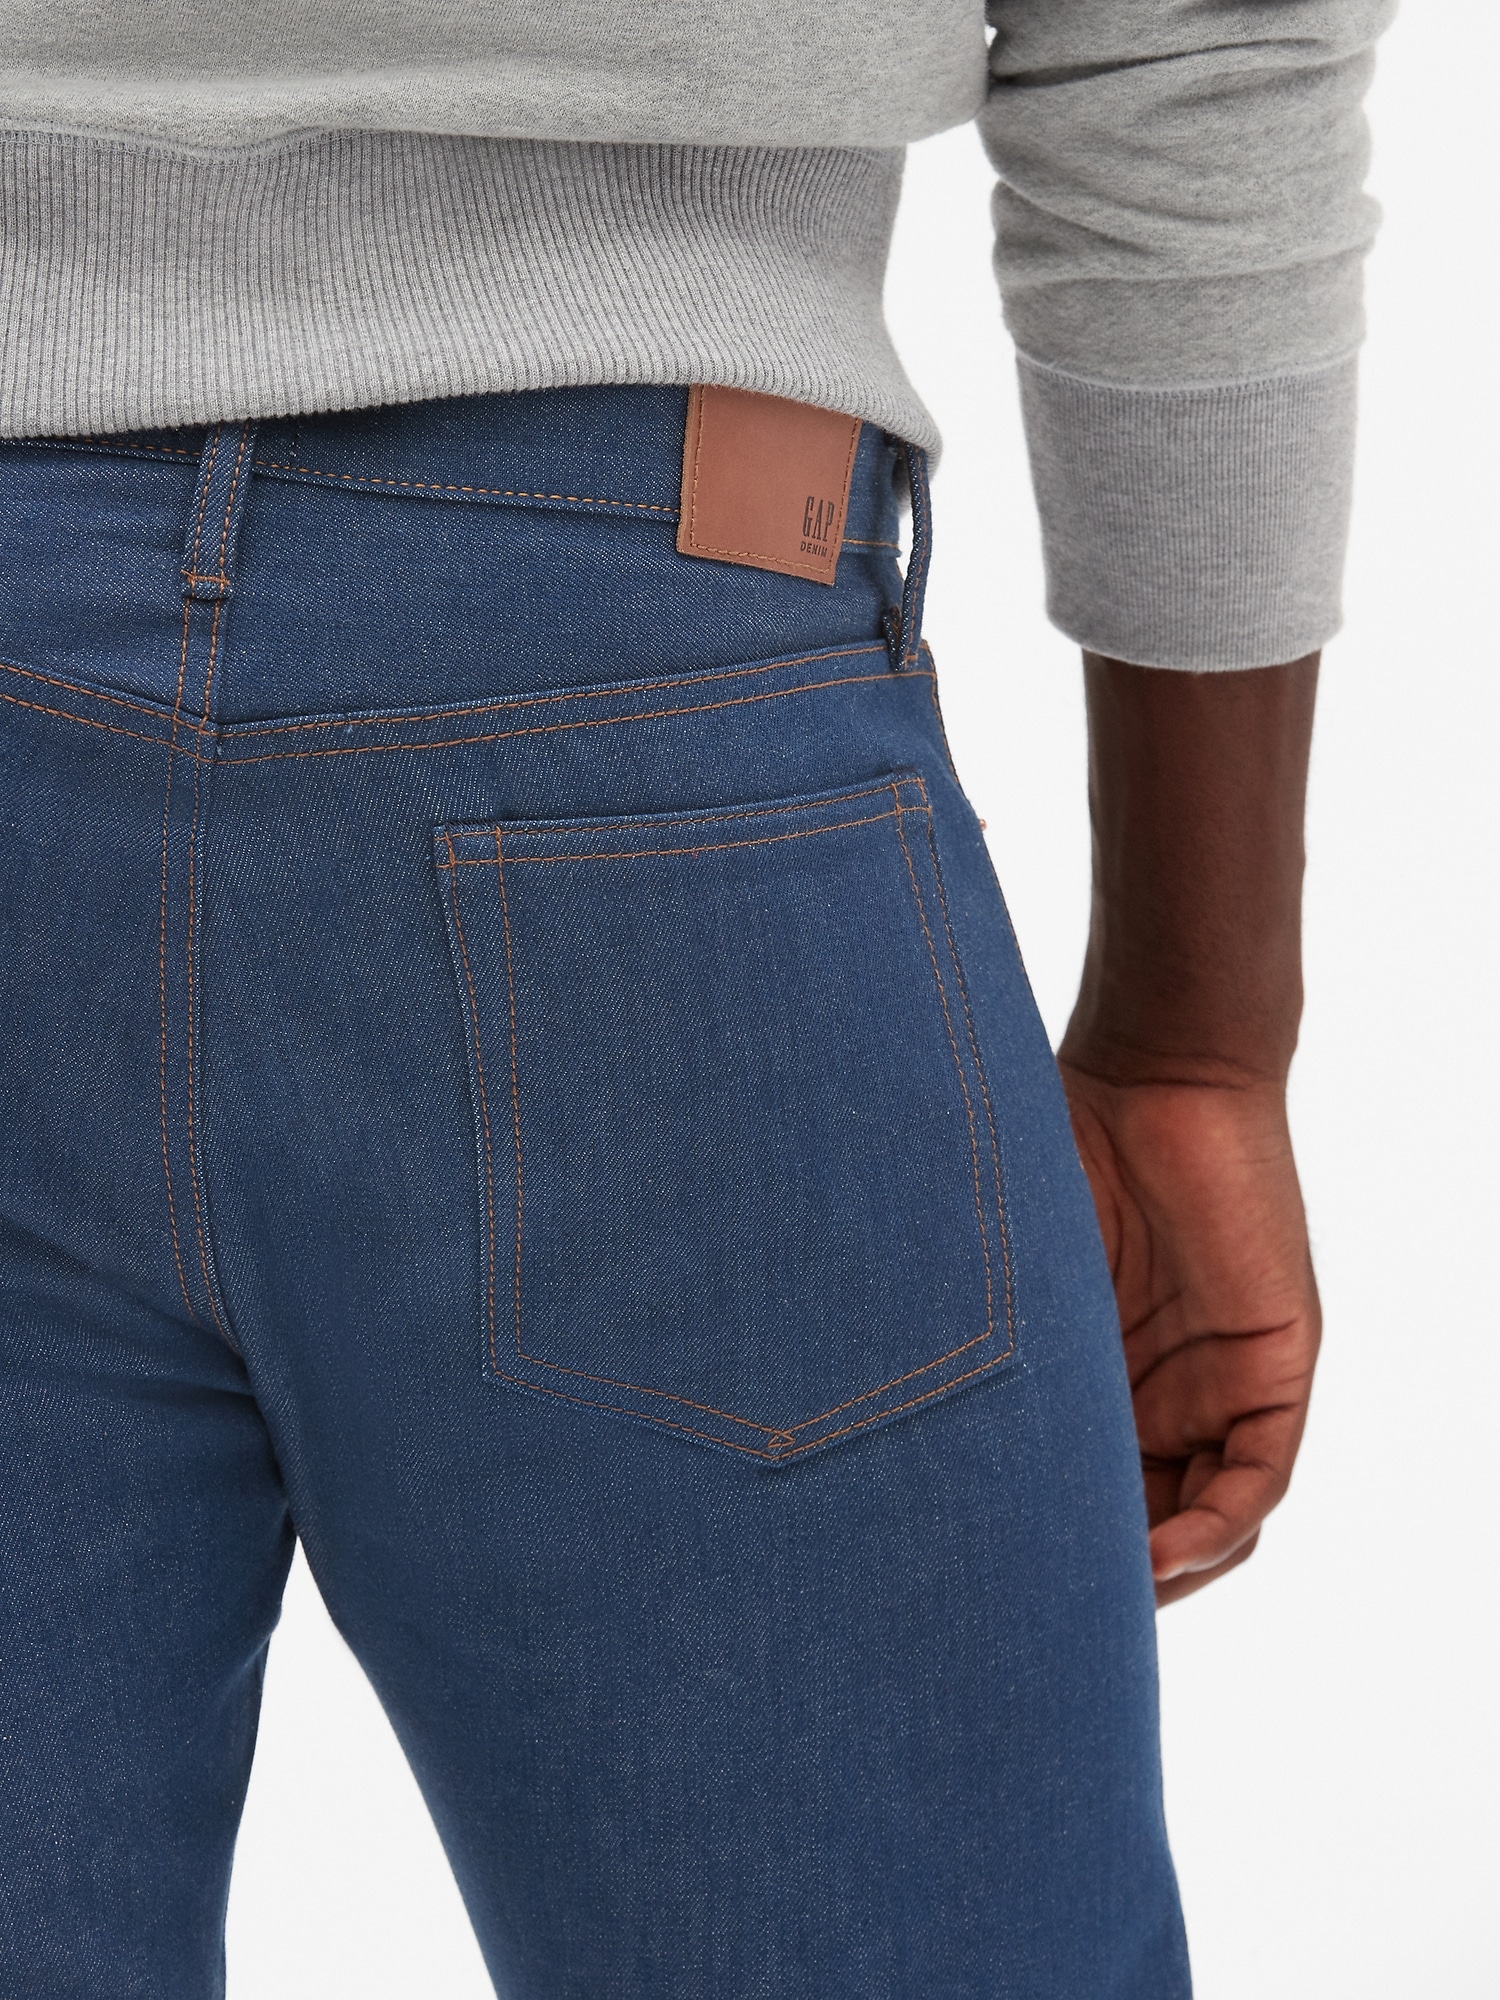 Limited-Edition Cone Denim® Selvedge Jeans in Slim Fit | Gap